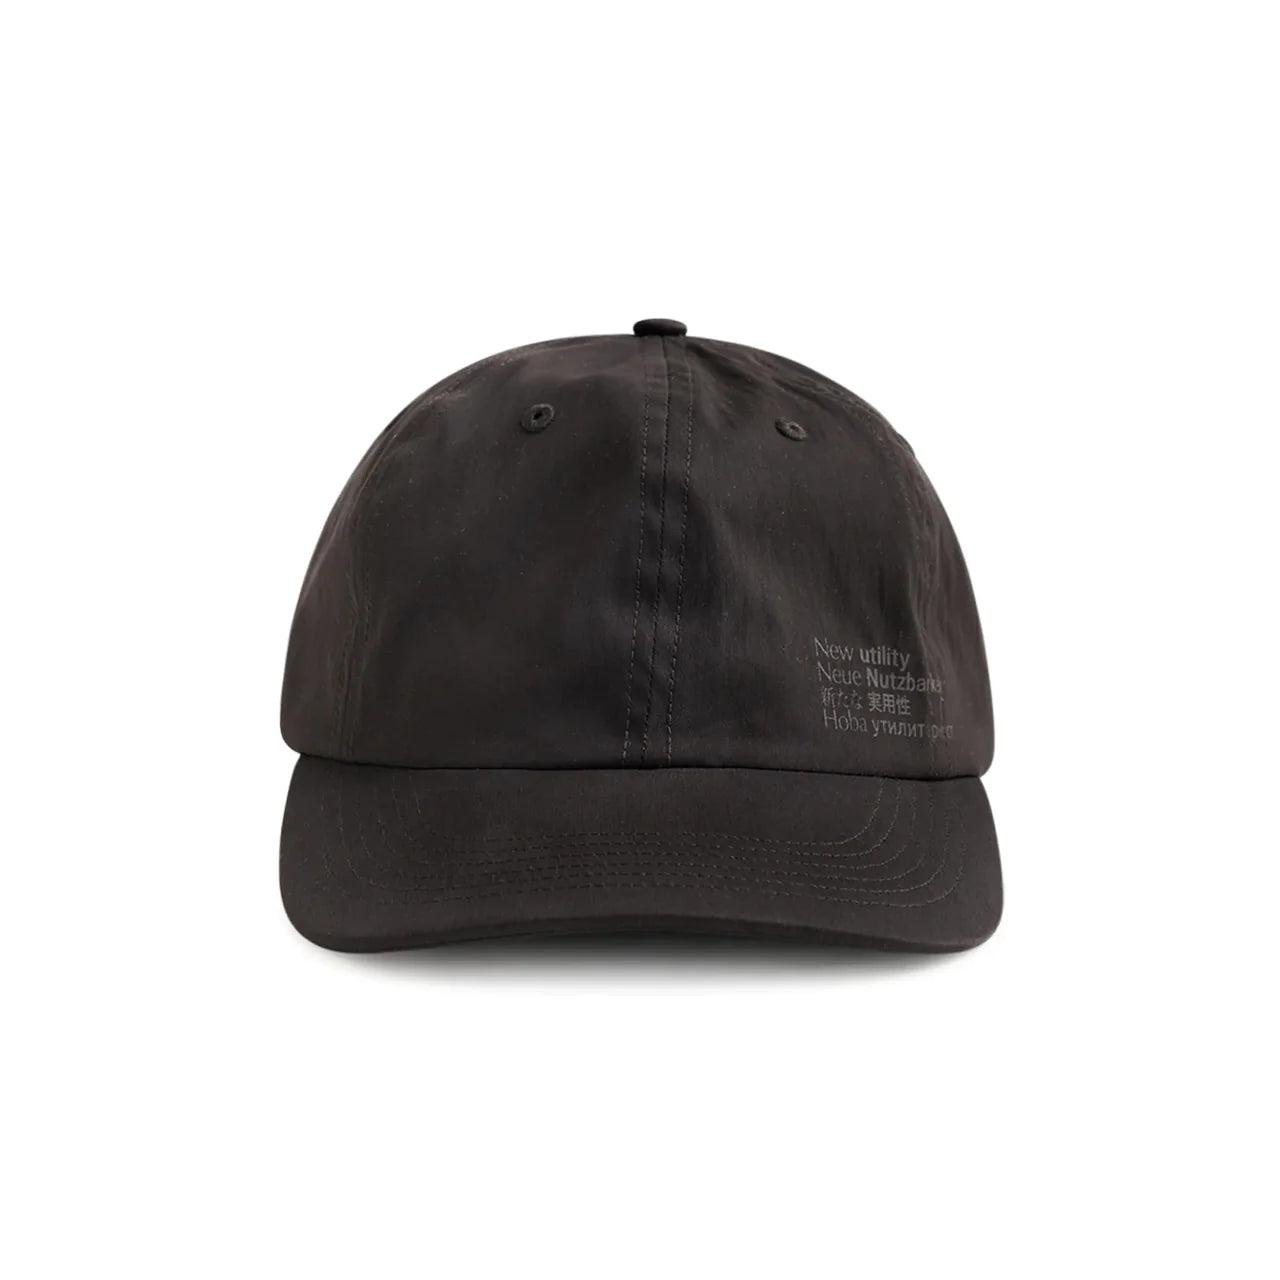 AFFXWRKS New Humility Cap (Grey Brown) by AFFIX